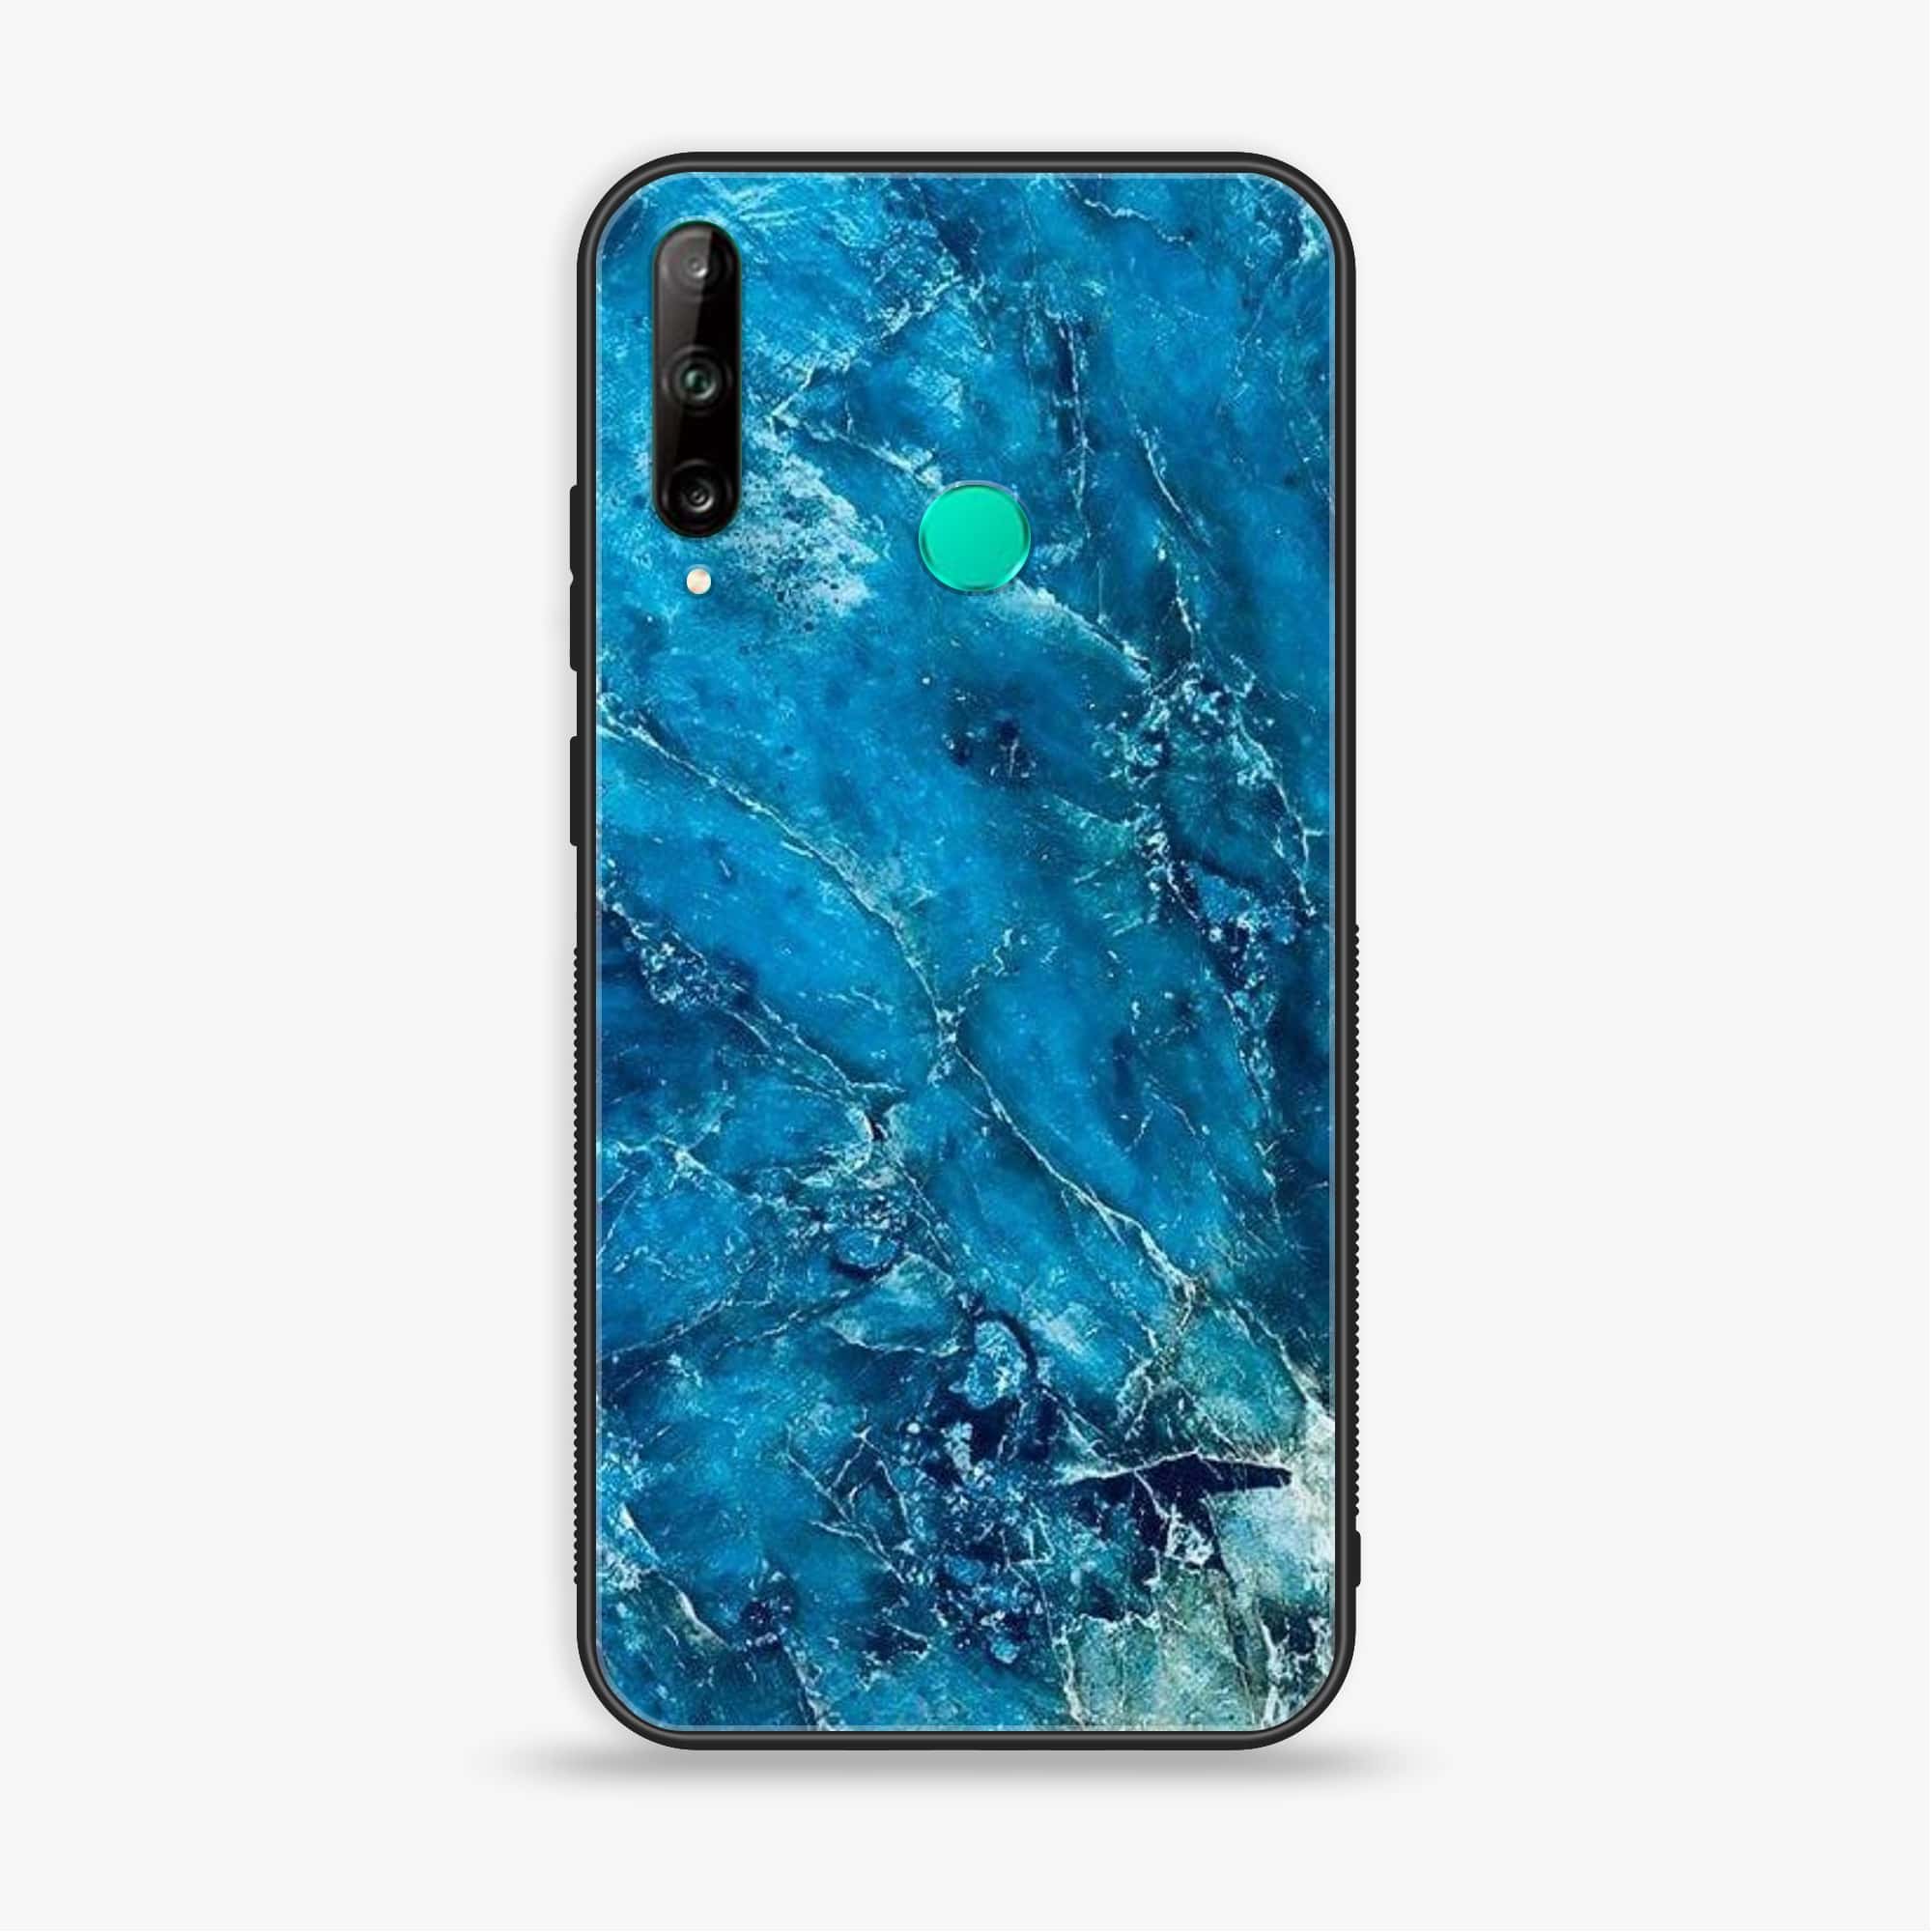 Huawei Y7p - Blue Marble Series V 2.0 - Premium Printed Glass soft Bumper shock Proof Case